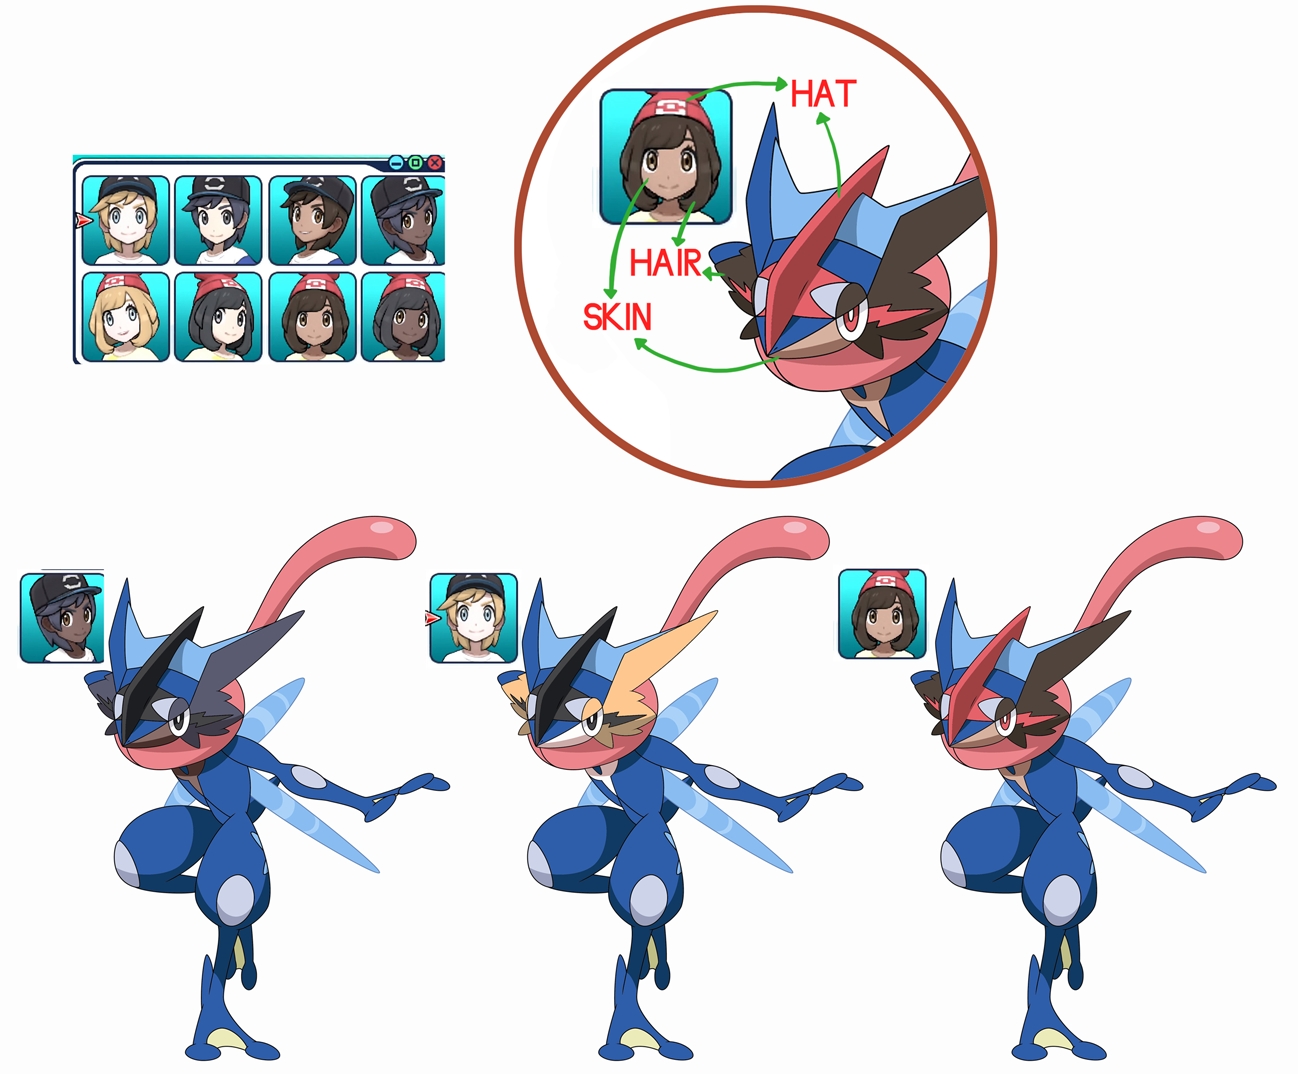 10 Best And Newest Pictures Of Ash Greninja for Desktop Computer with FULL ...